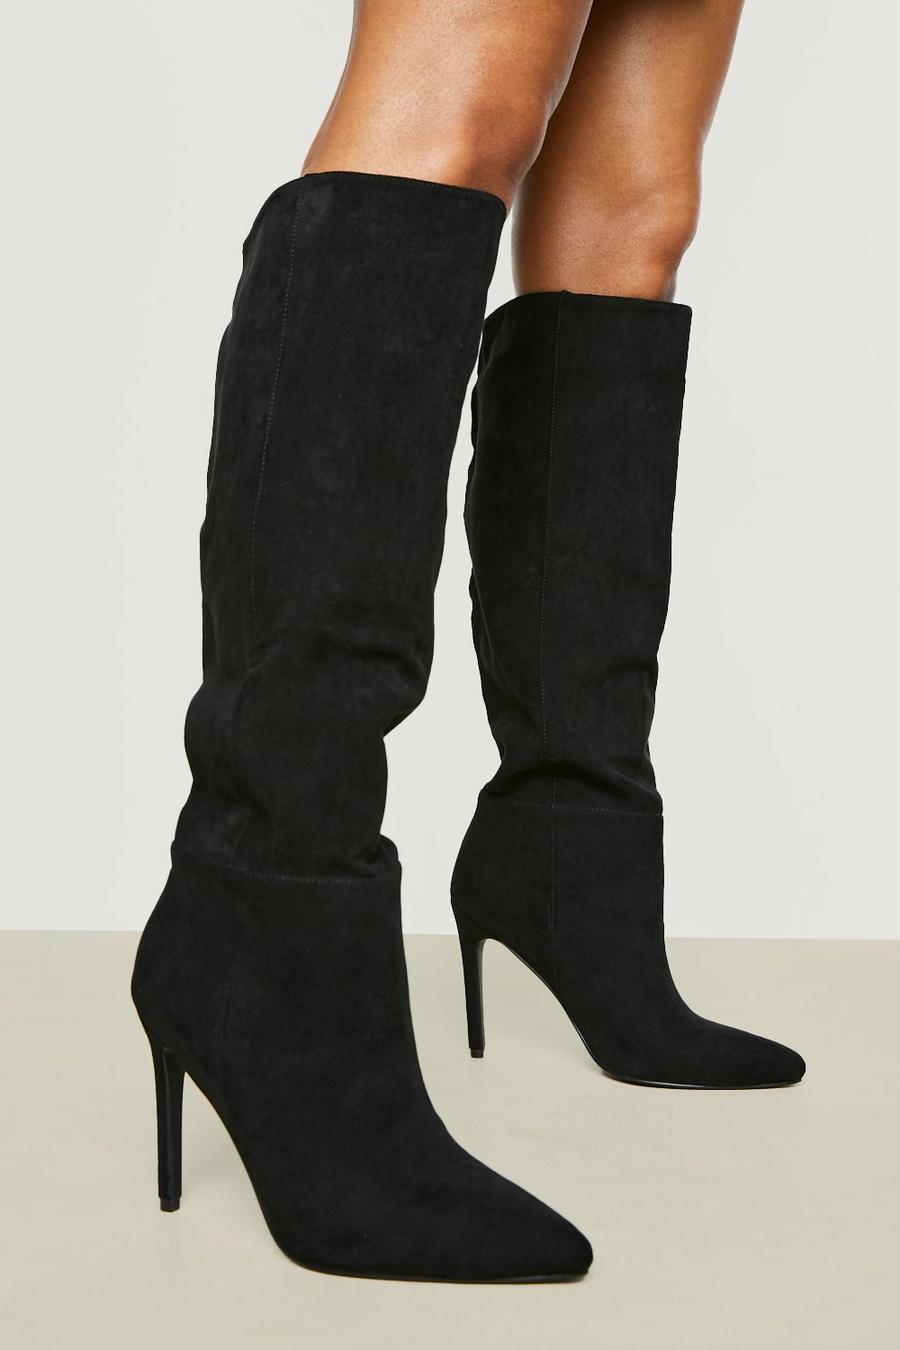 Black Pointed Knee High Stiletto Heeled Boots